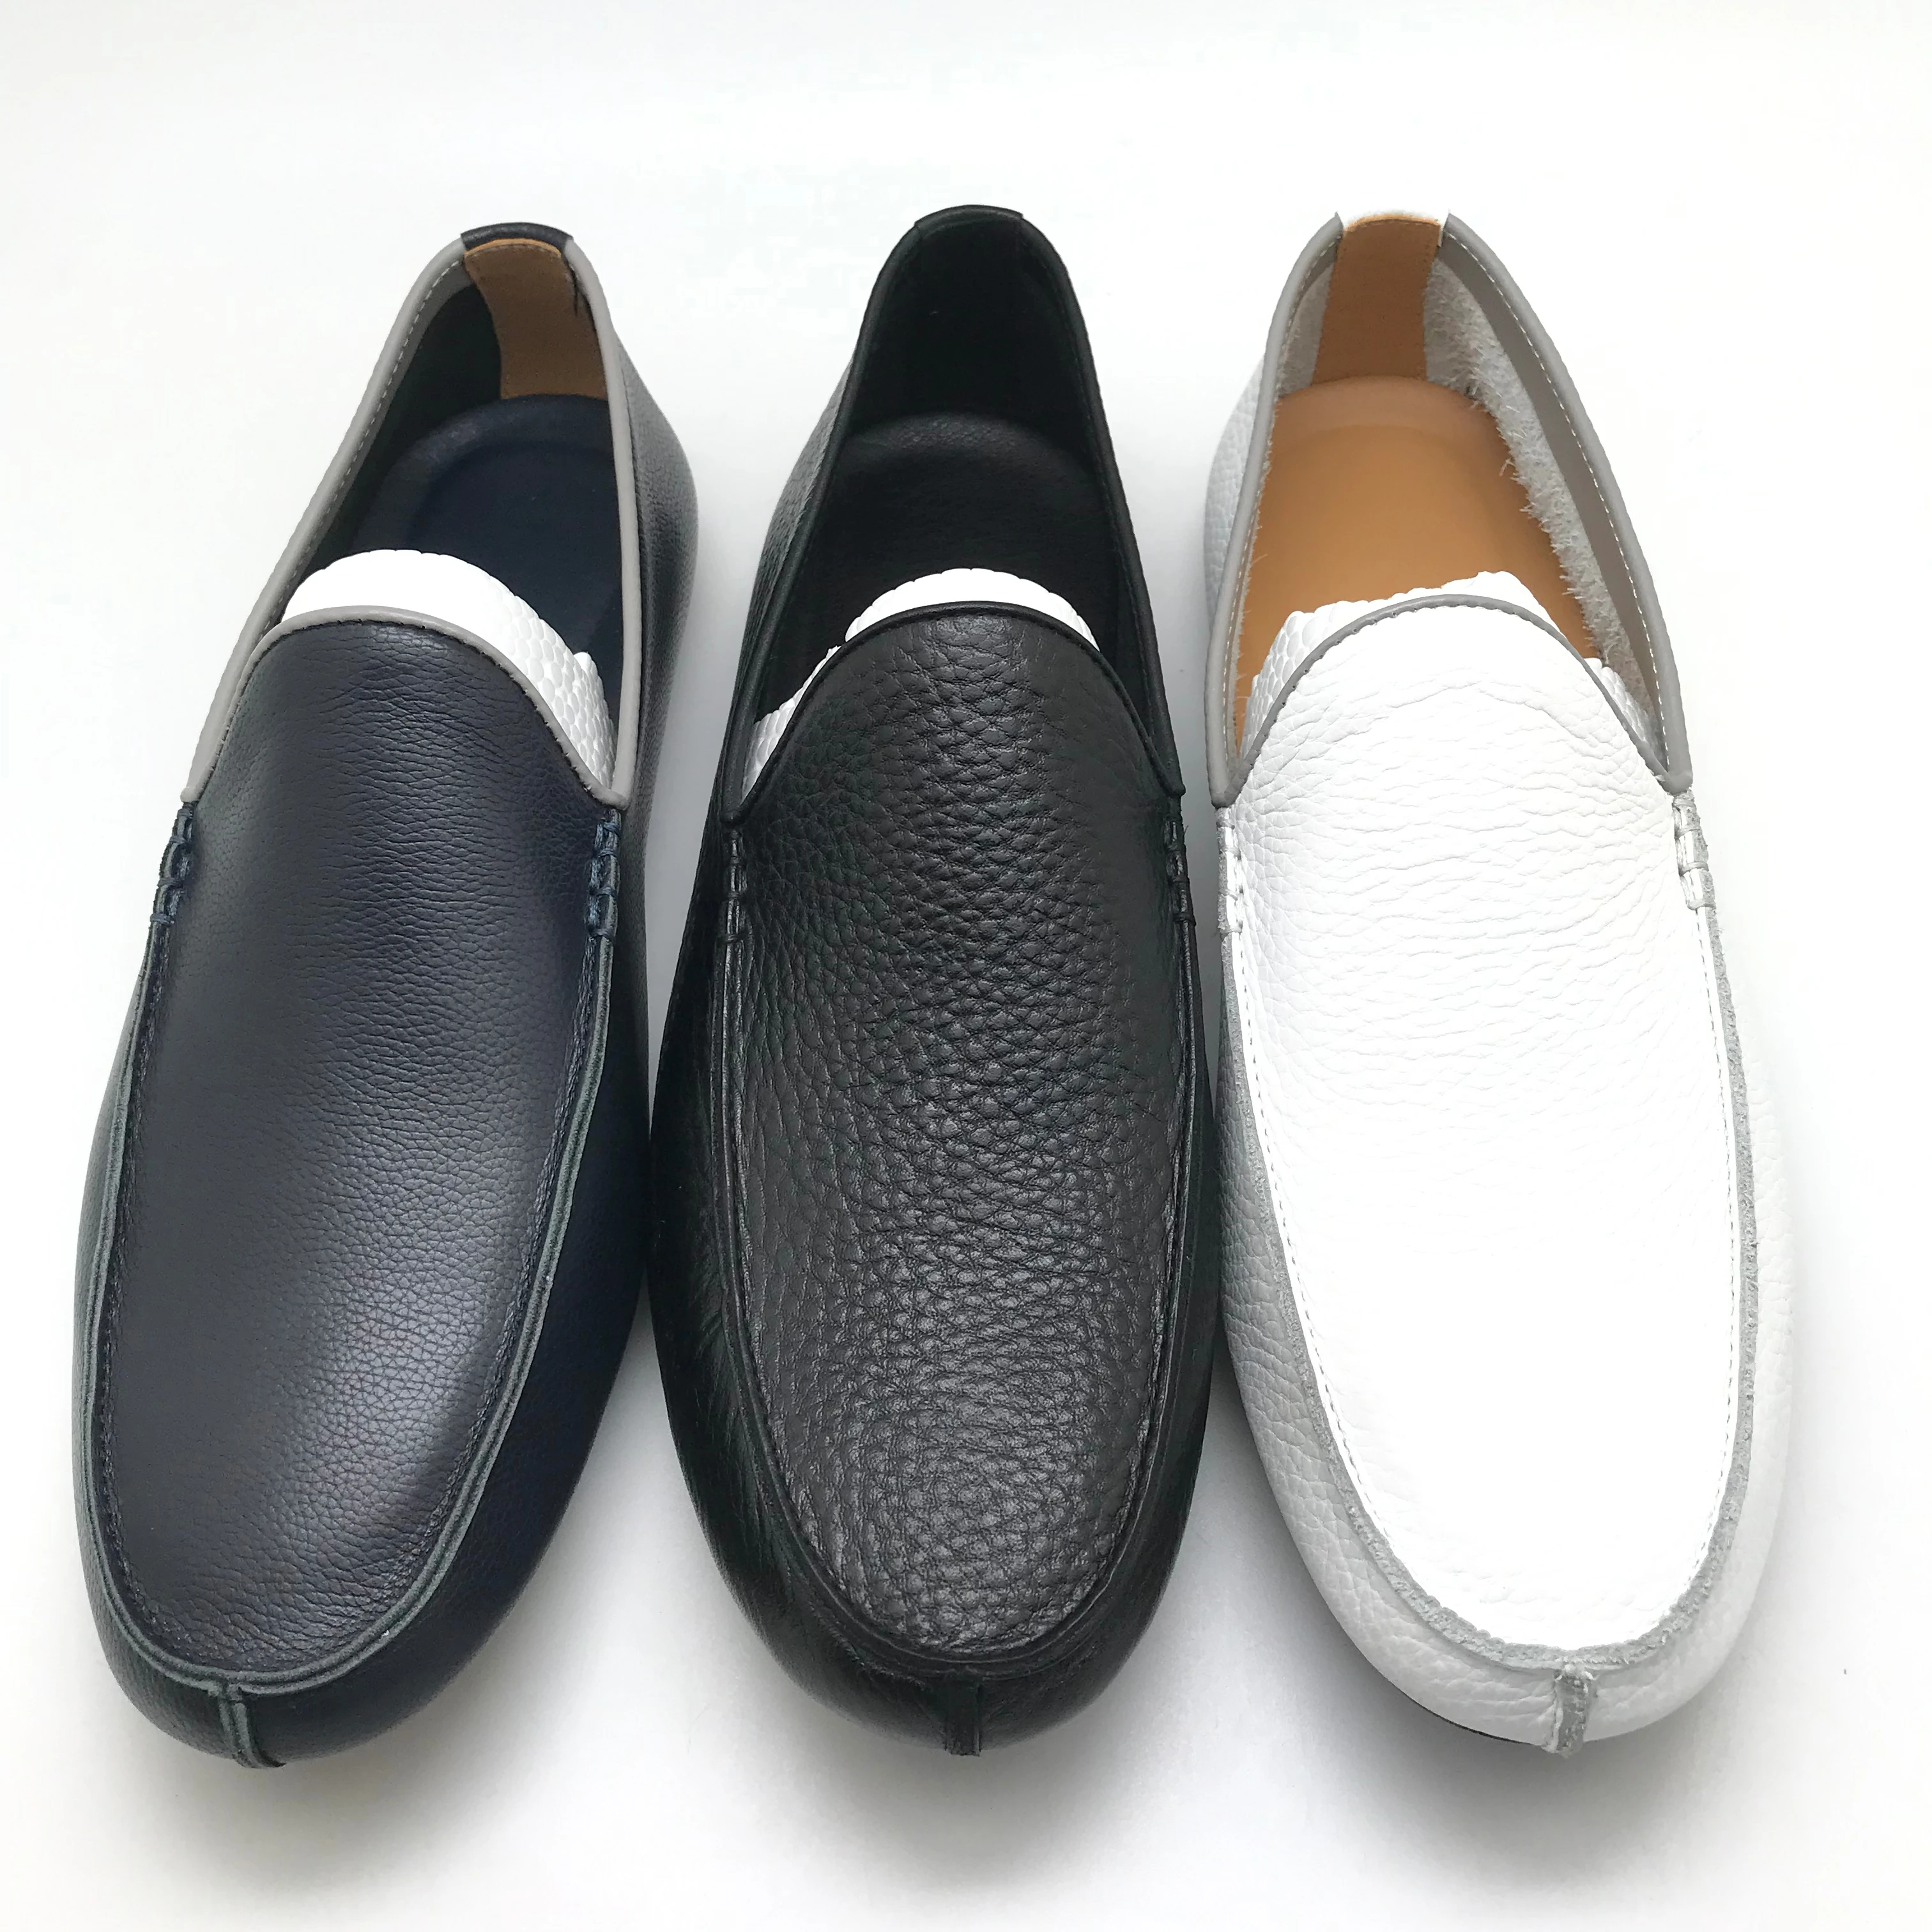 

China Manufacturer Custom Wholesale Leather Slippers for Men, Flat Moccasins Loafer Driving Shoes Men's Dress Shoes, Black white blue